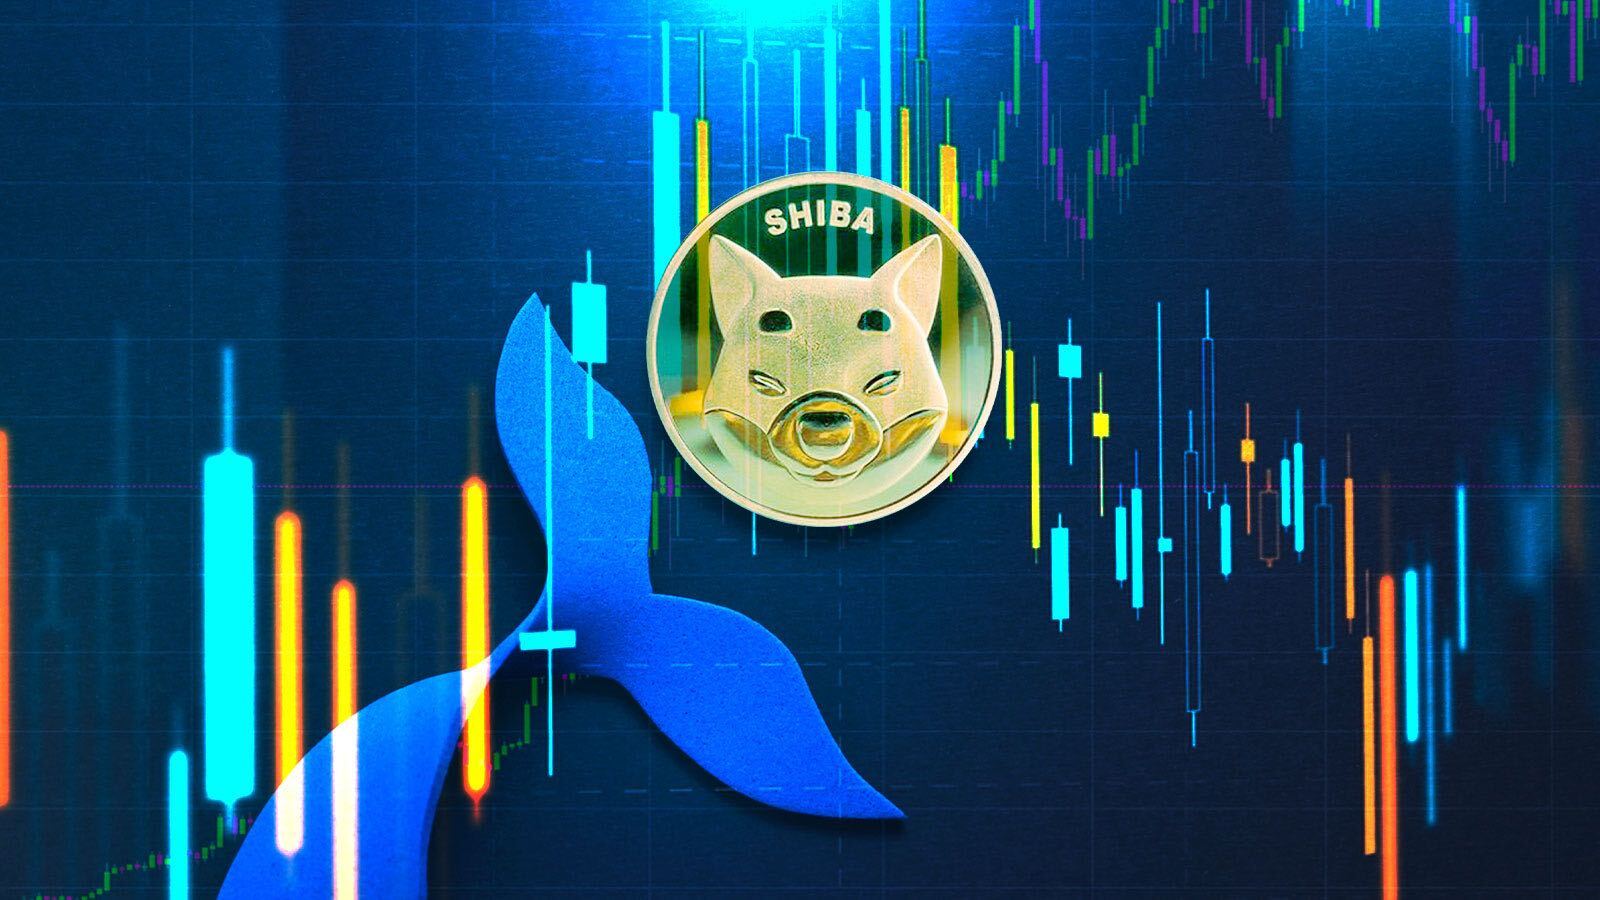 Shiba Inu (SHIB) Worth Of $3 Million Was Bought By This ETH Whale In 2 Days